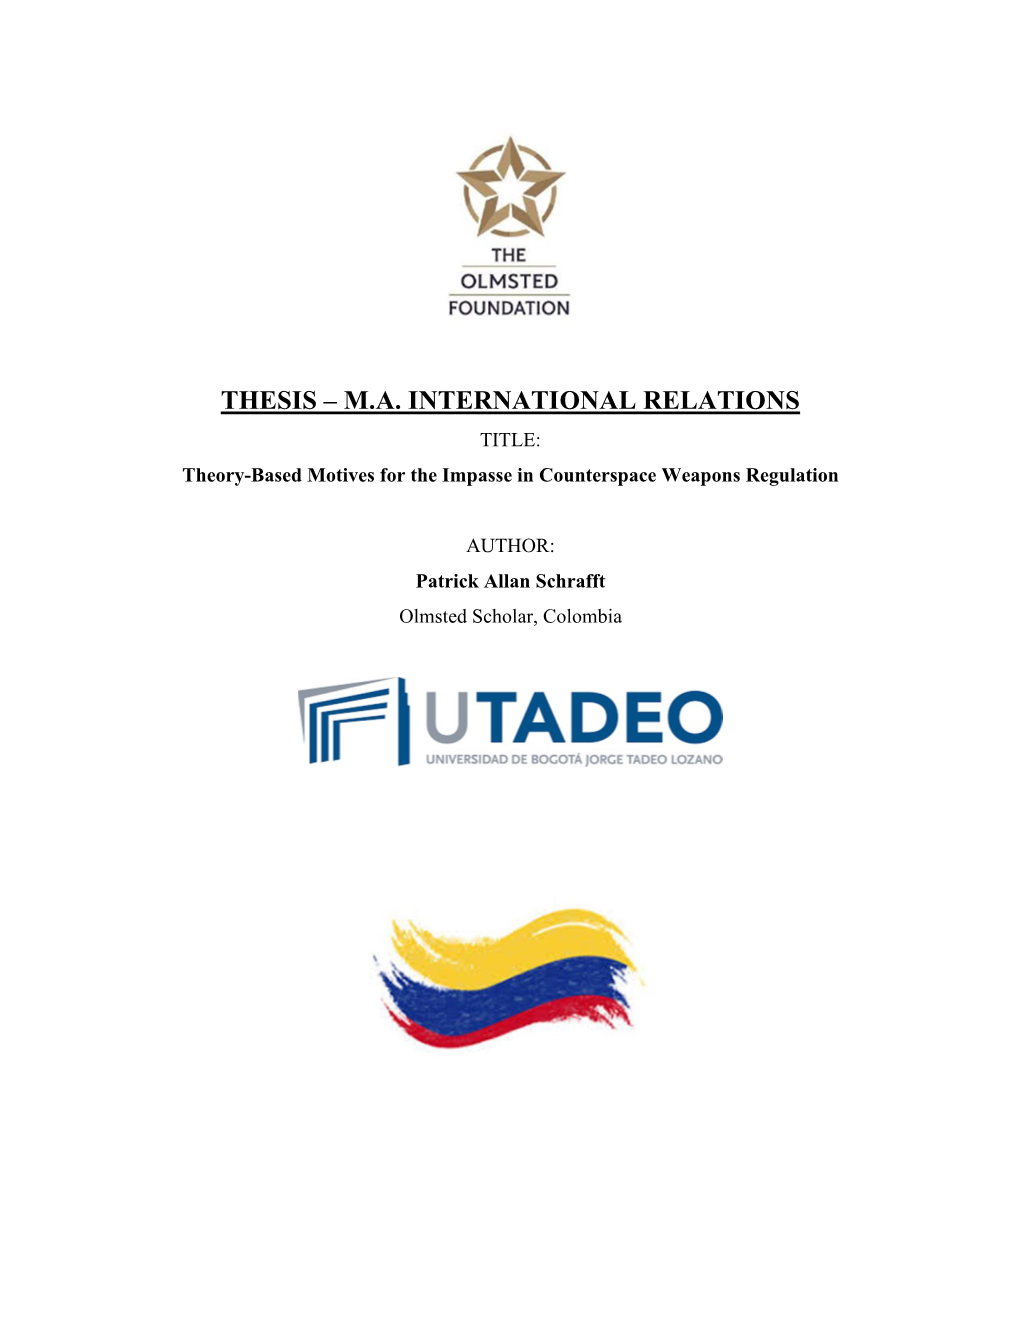 THESIS – M.A. INTERNATIONAL RELATIONS TITLE: Theory-Based Motives for the Impasse in Counterspace Weapons Regulation